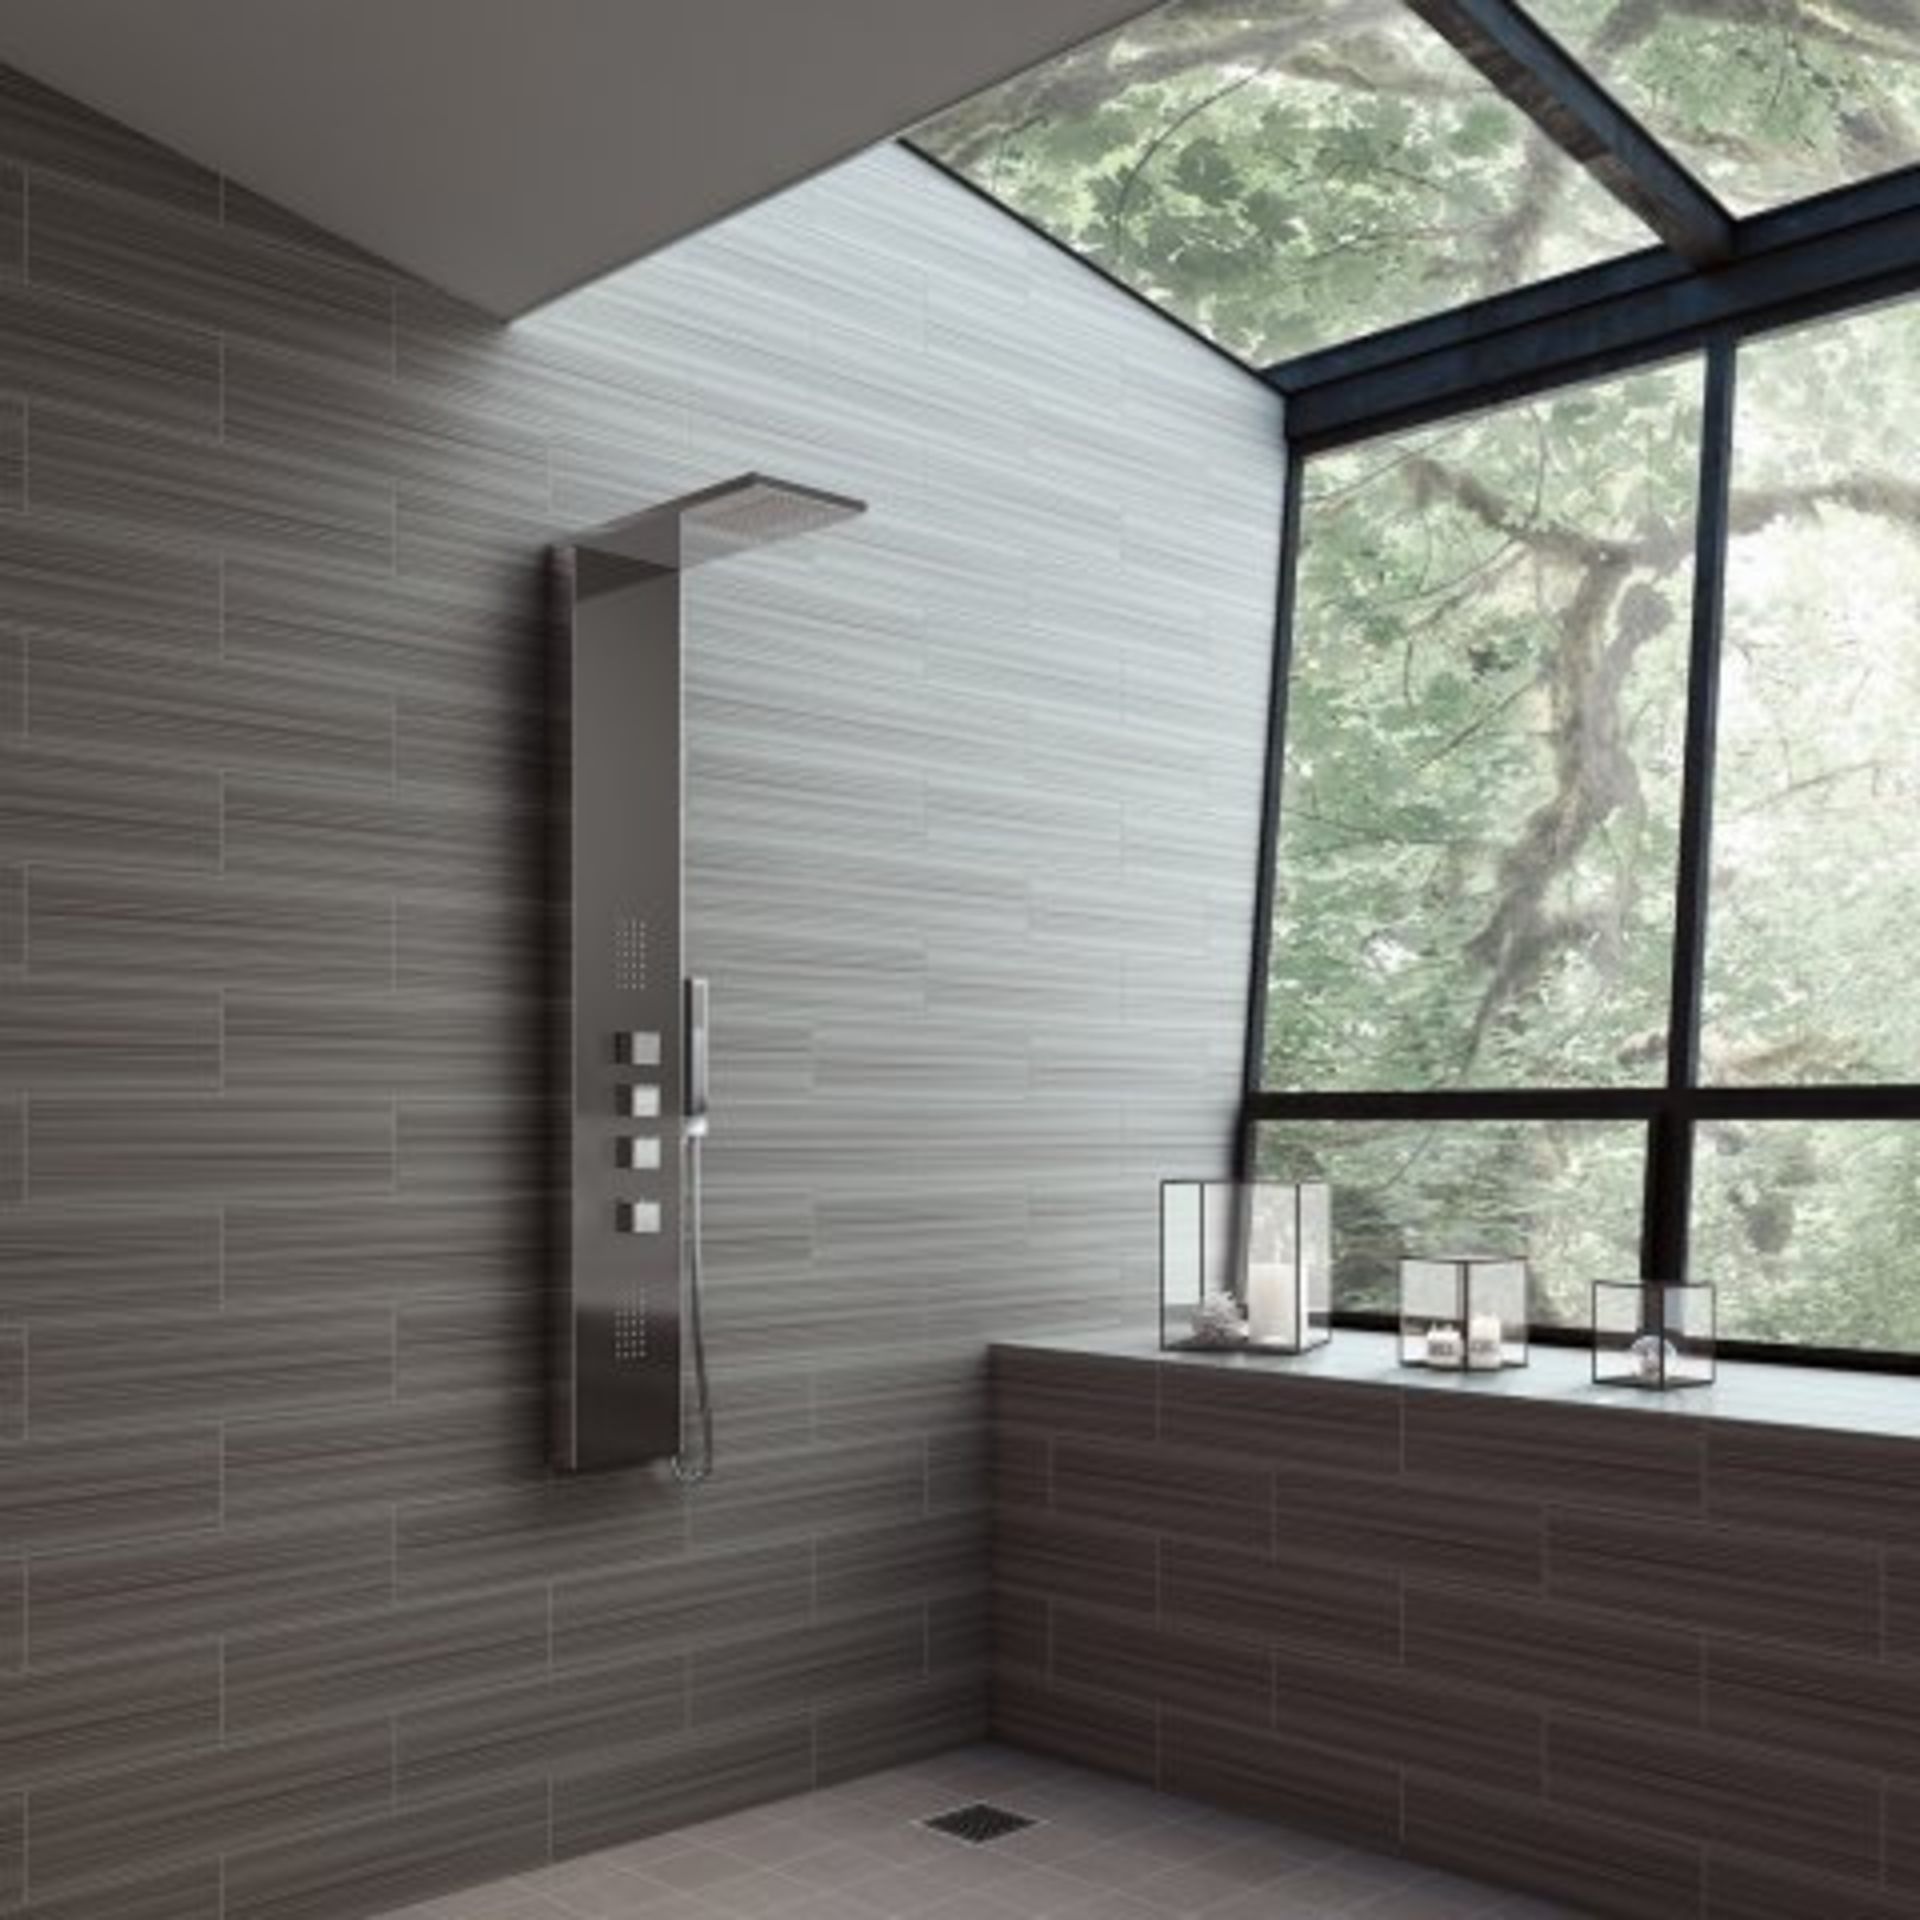 (AA10) Black Shower Panel Tower & Luxury Body Jets. RRP £599.99. Feel inspired with our premium - Image 2 of 5